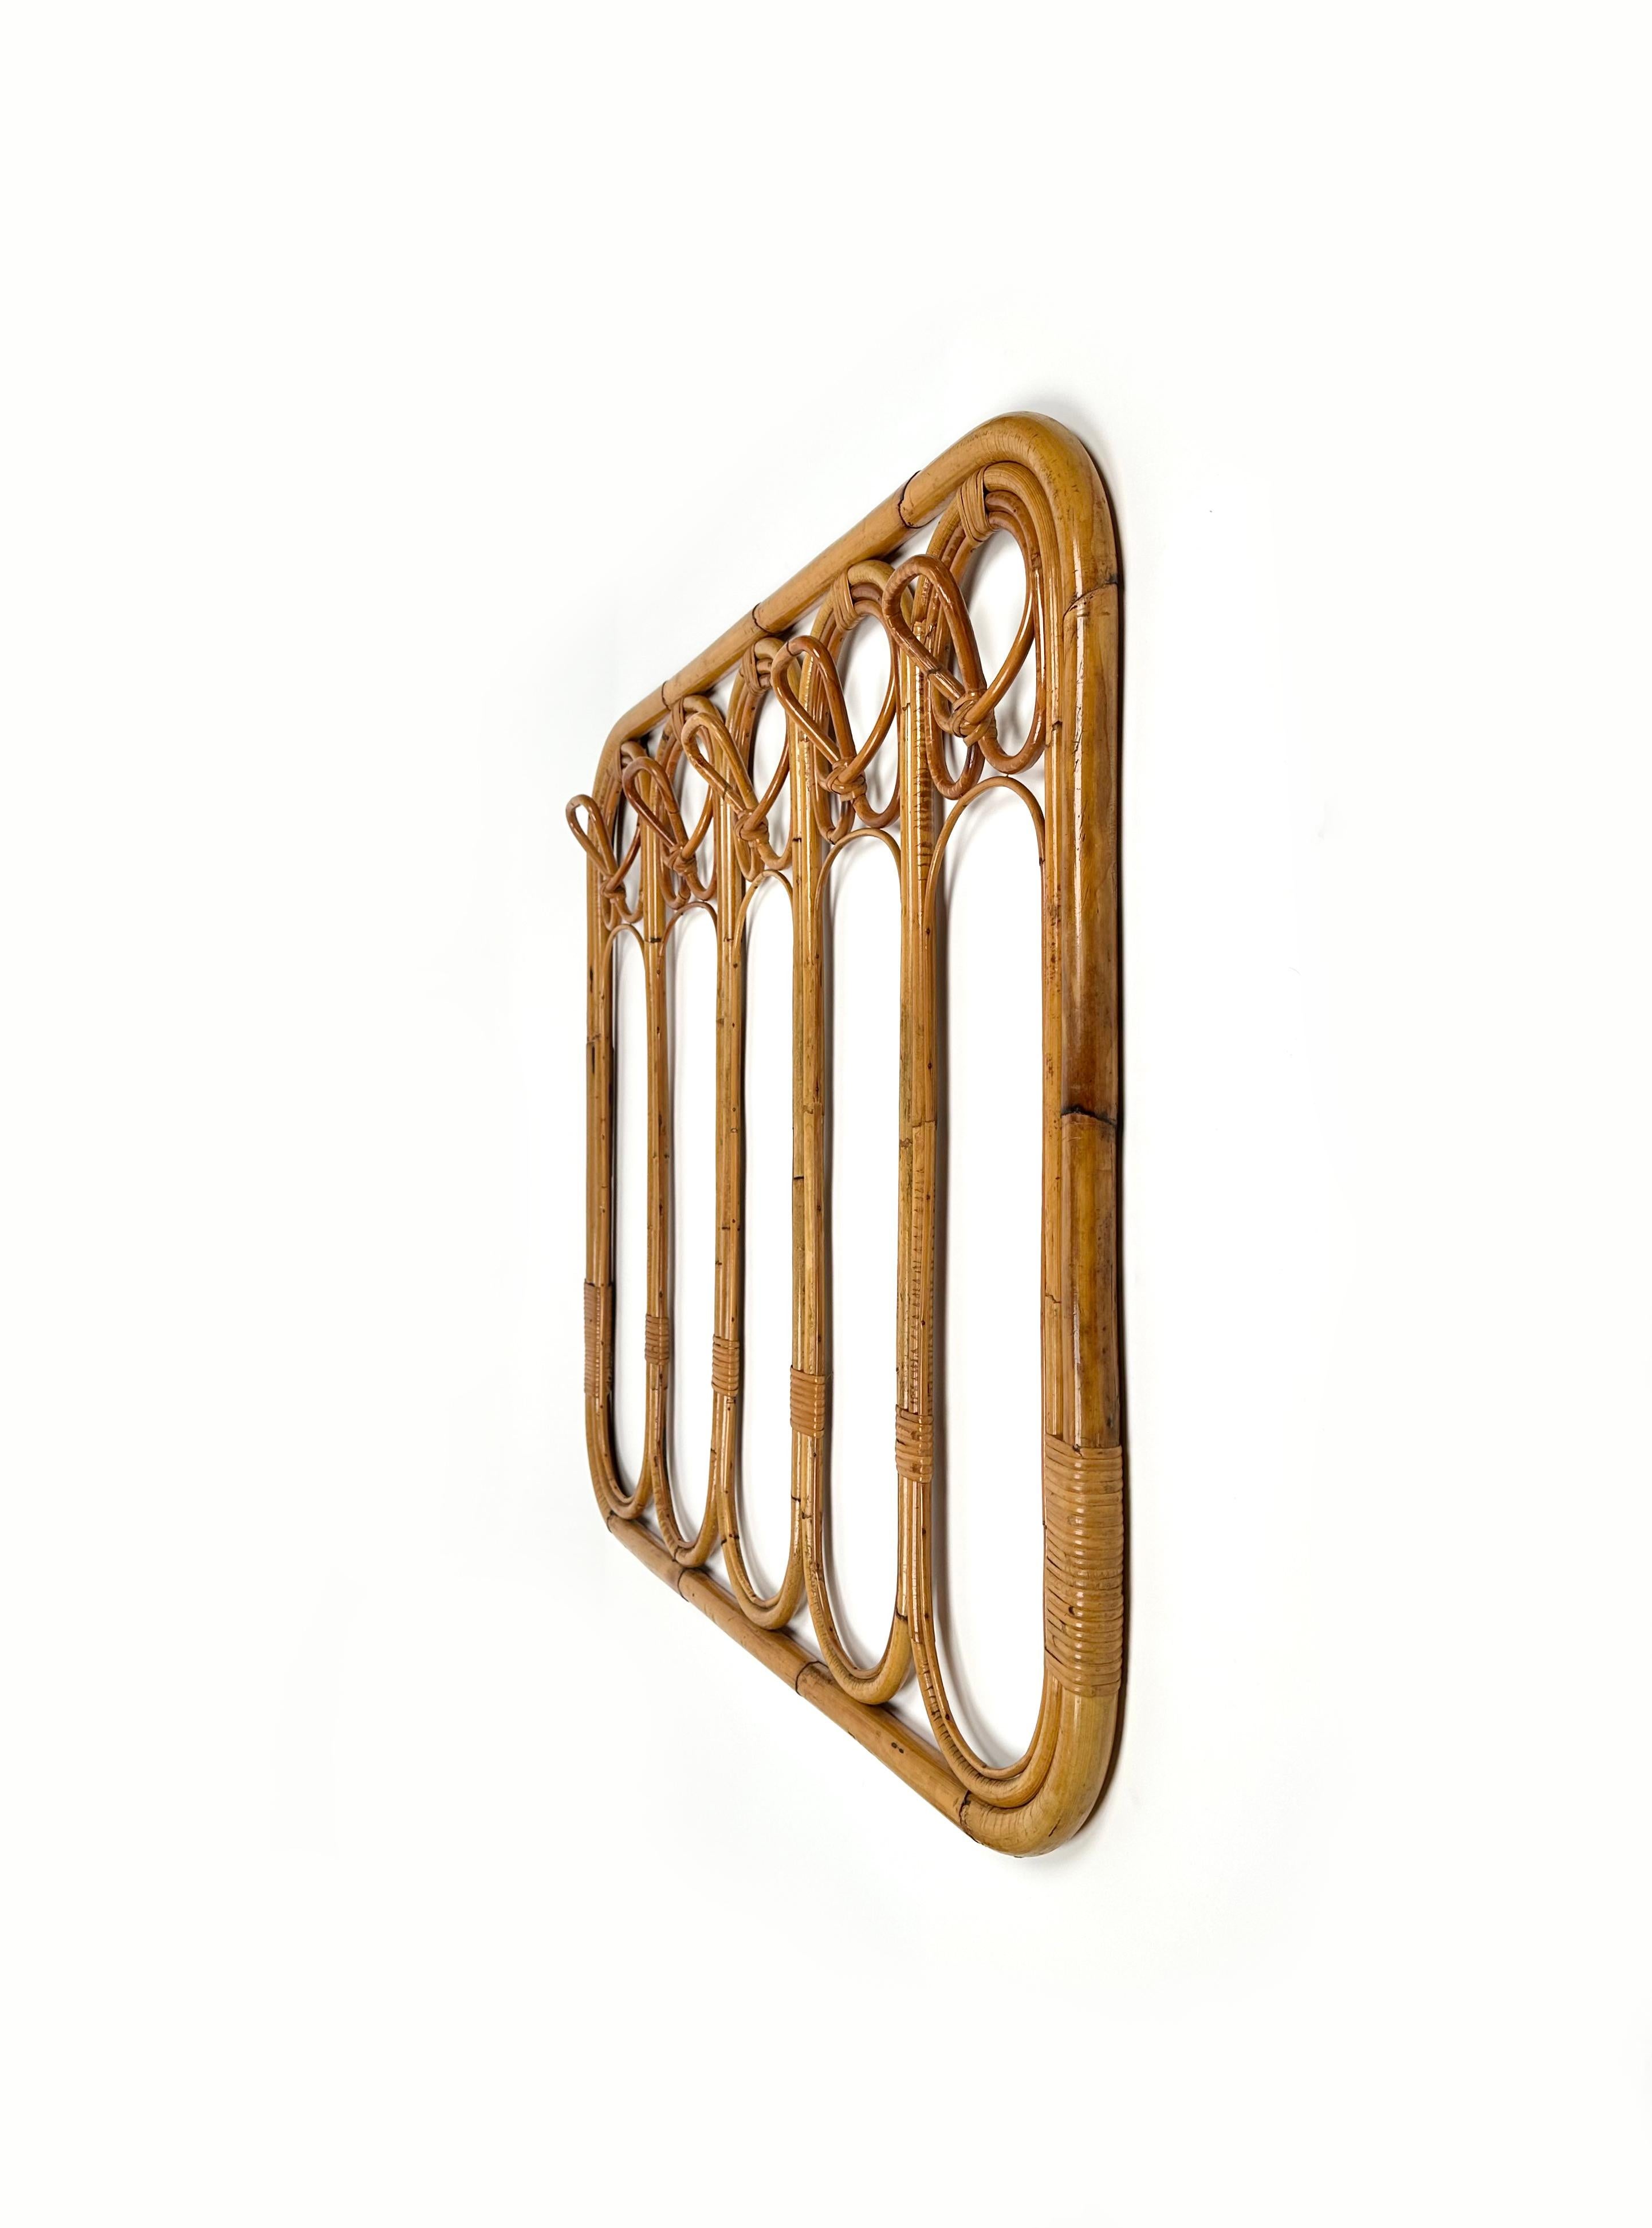 Mid-Century Bamboo and Rattan Coat Rack Stand, Italy 1960s For Sale 1